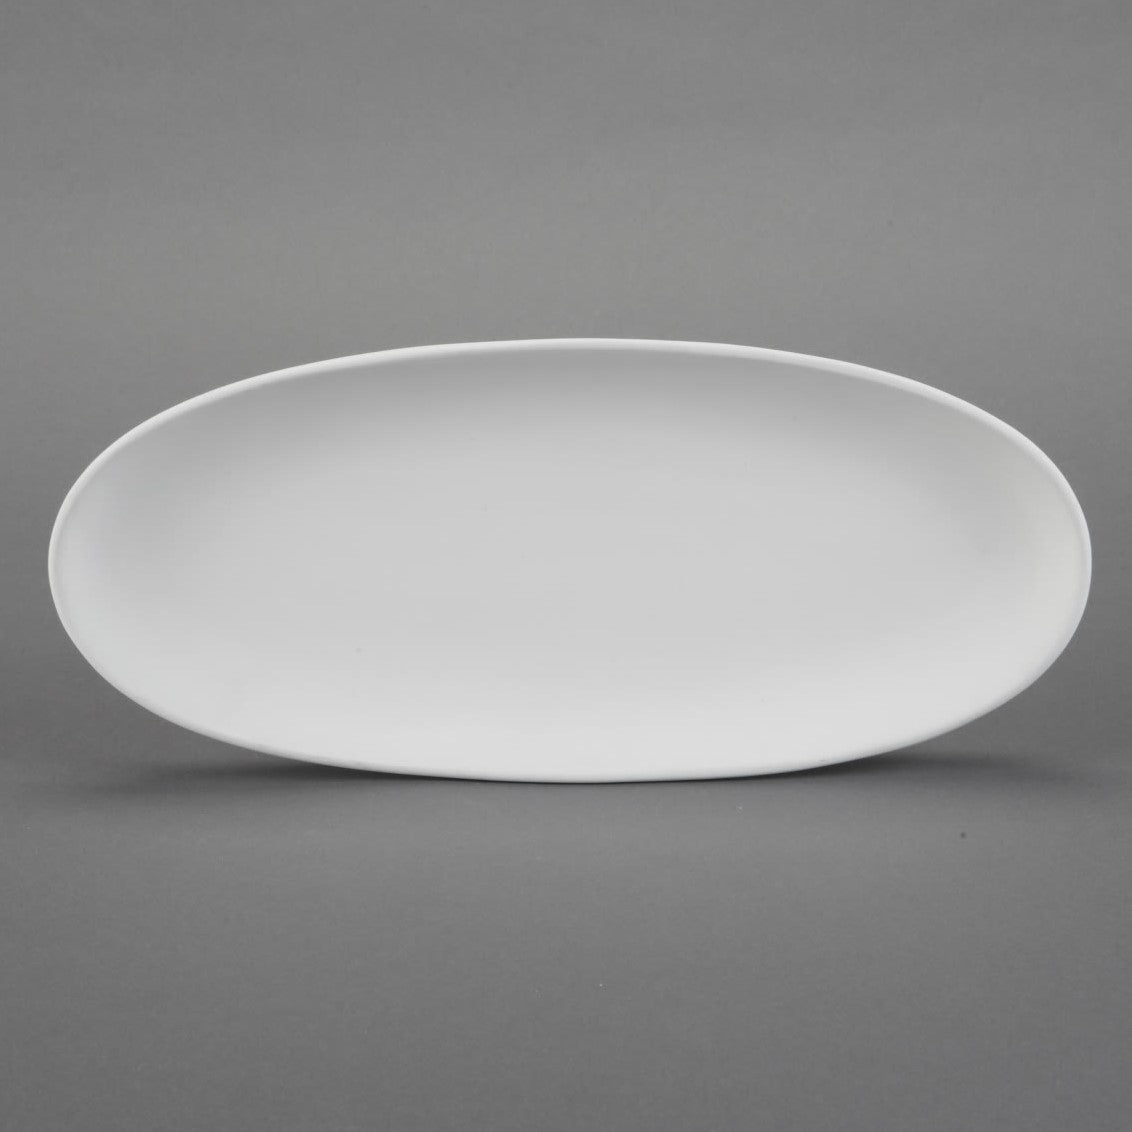 Medium Oval French Bread Plate